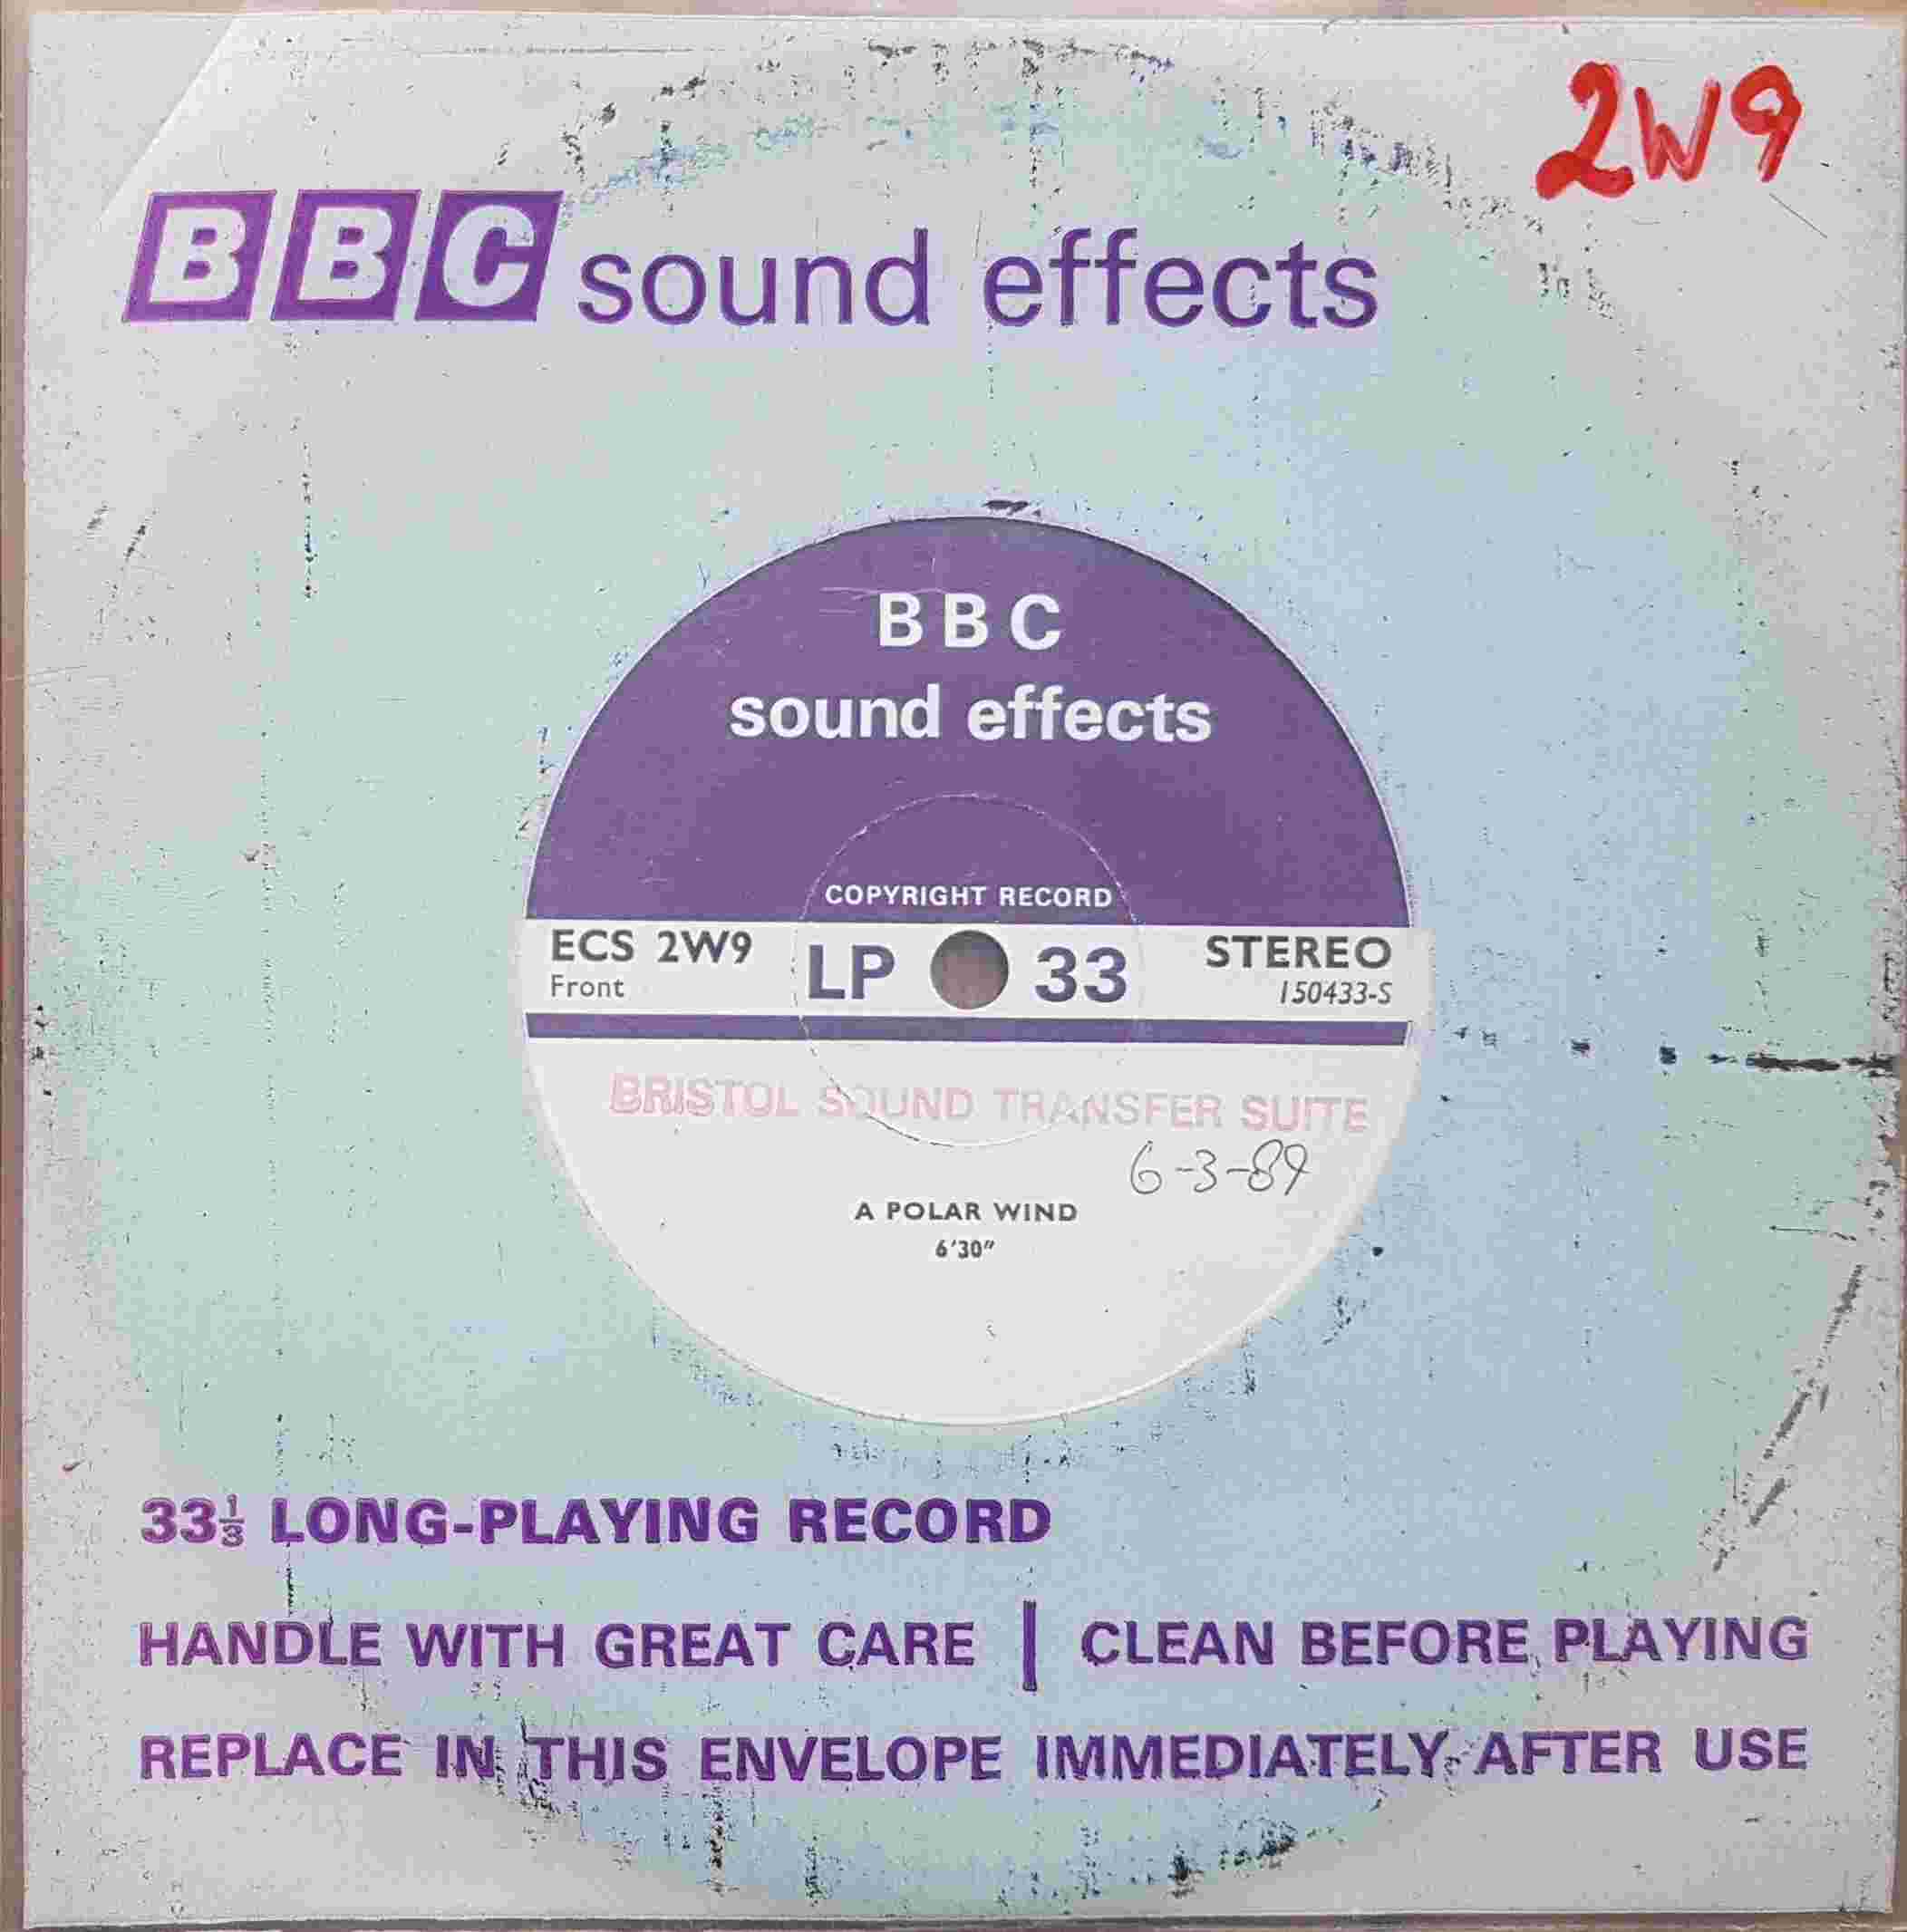 Picture of ECS 2W9 A polar wind / Howling wind by artist Not registered from the BBC records and Tapes library